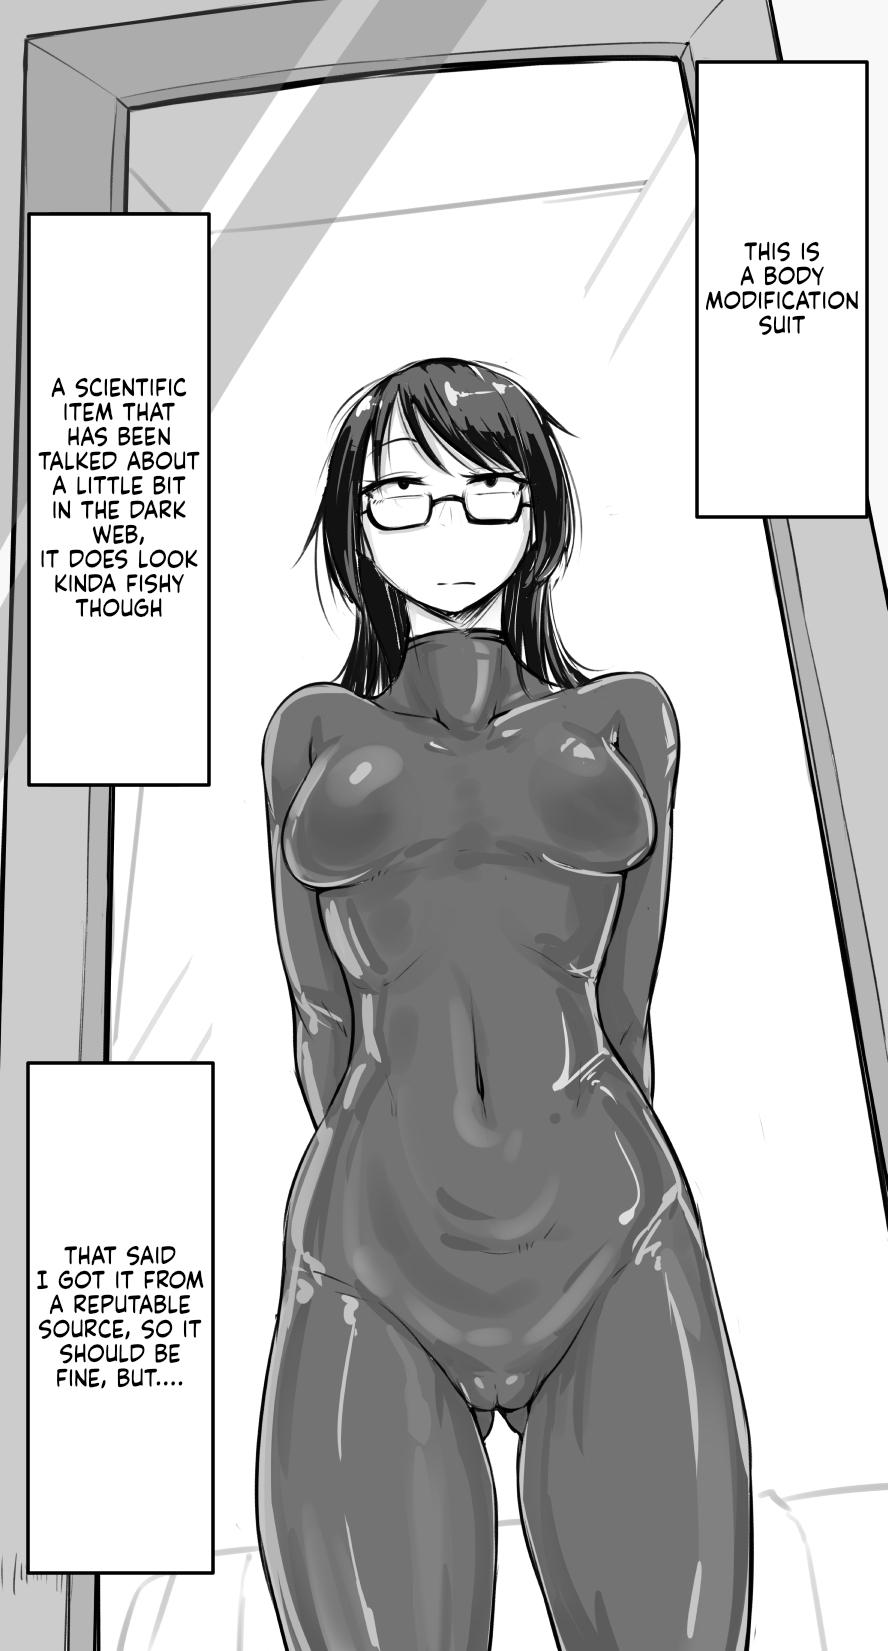 A Geek girl getting the ideal body 2